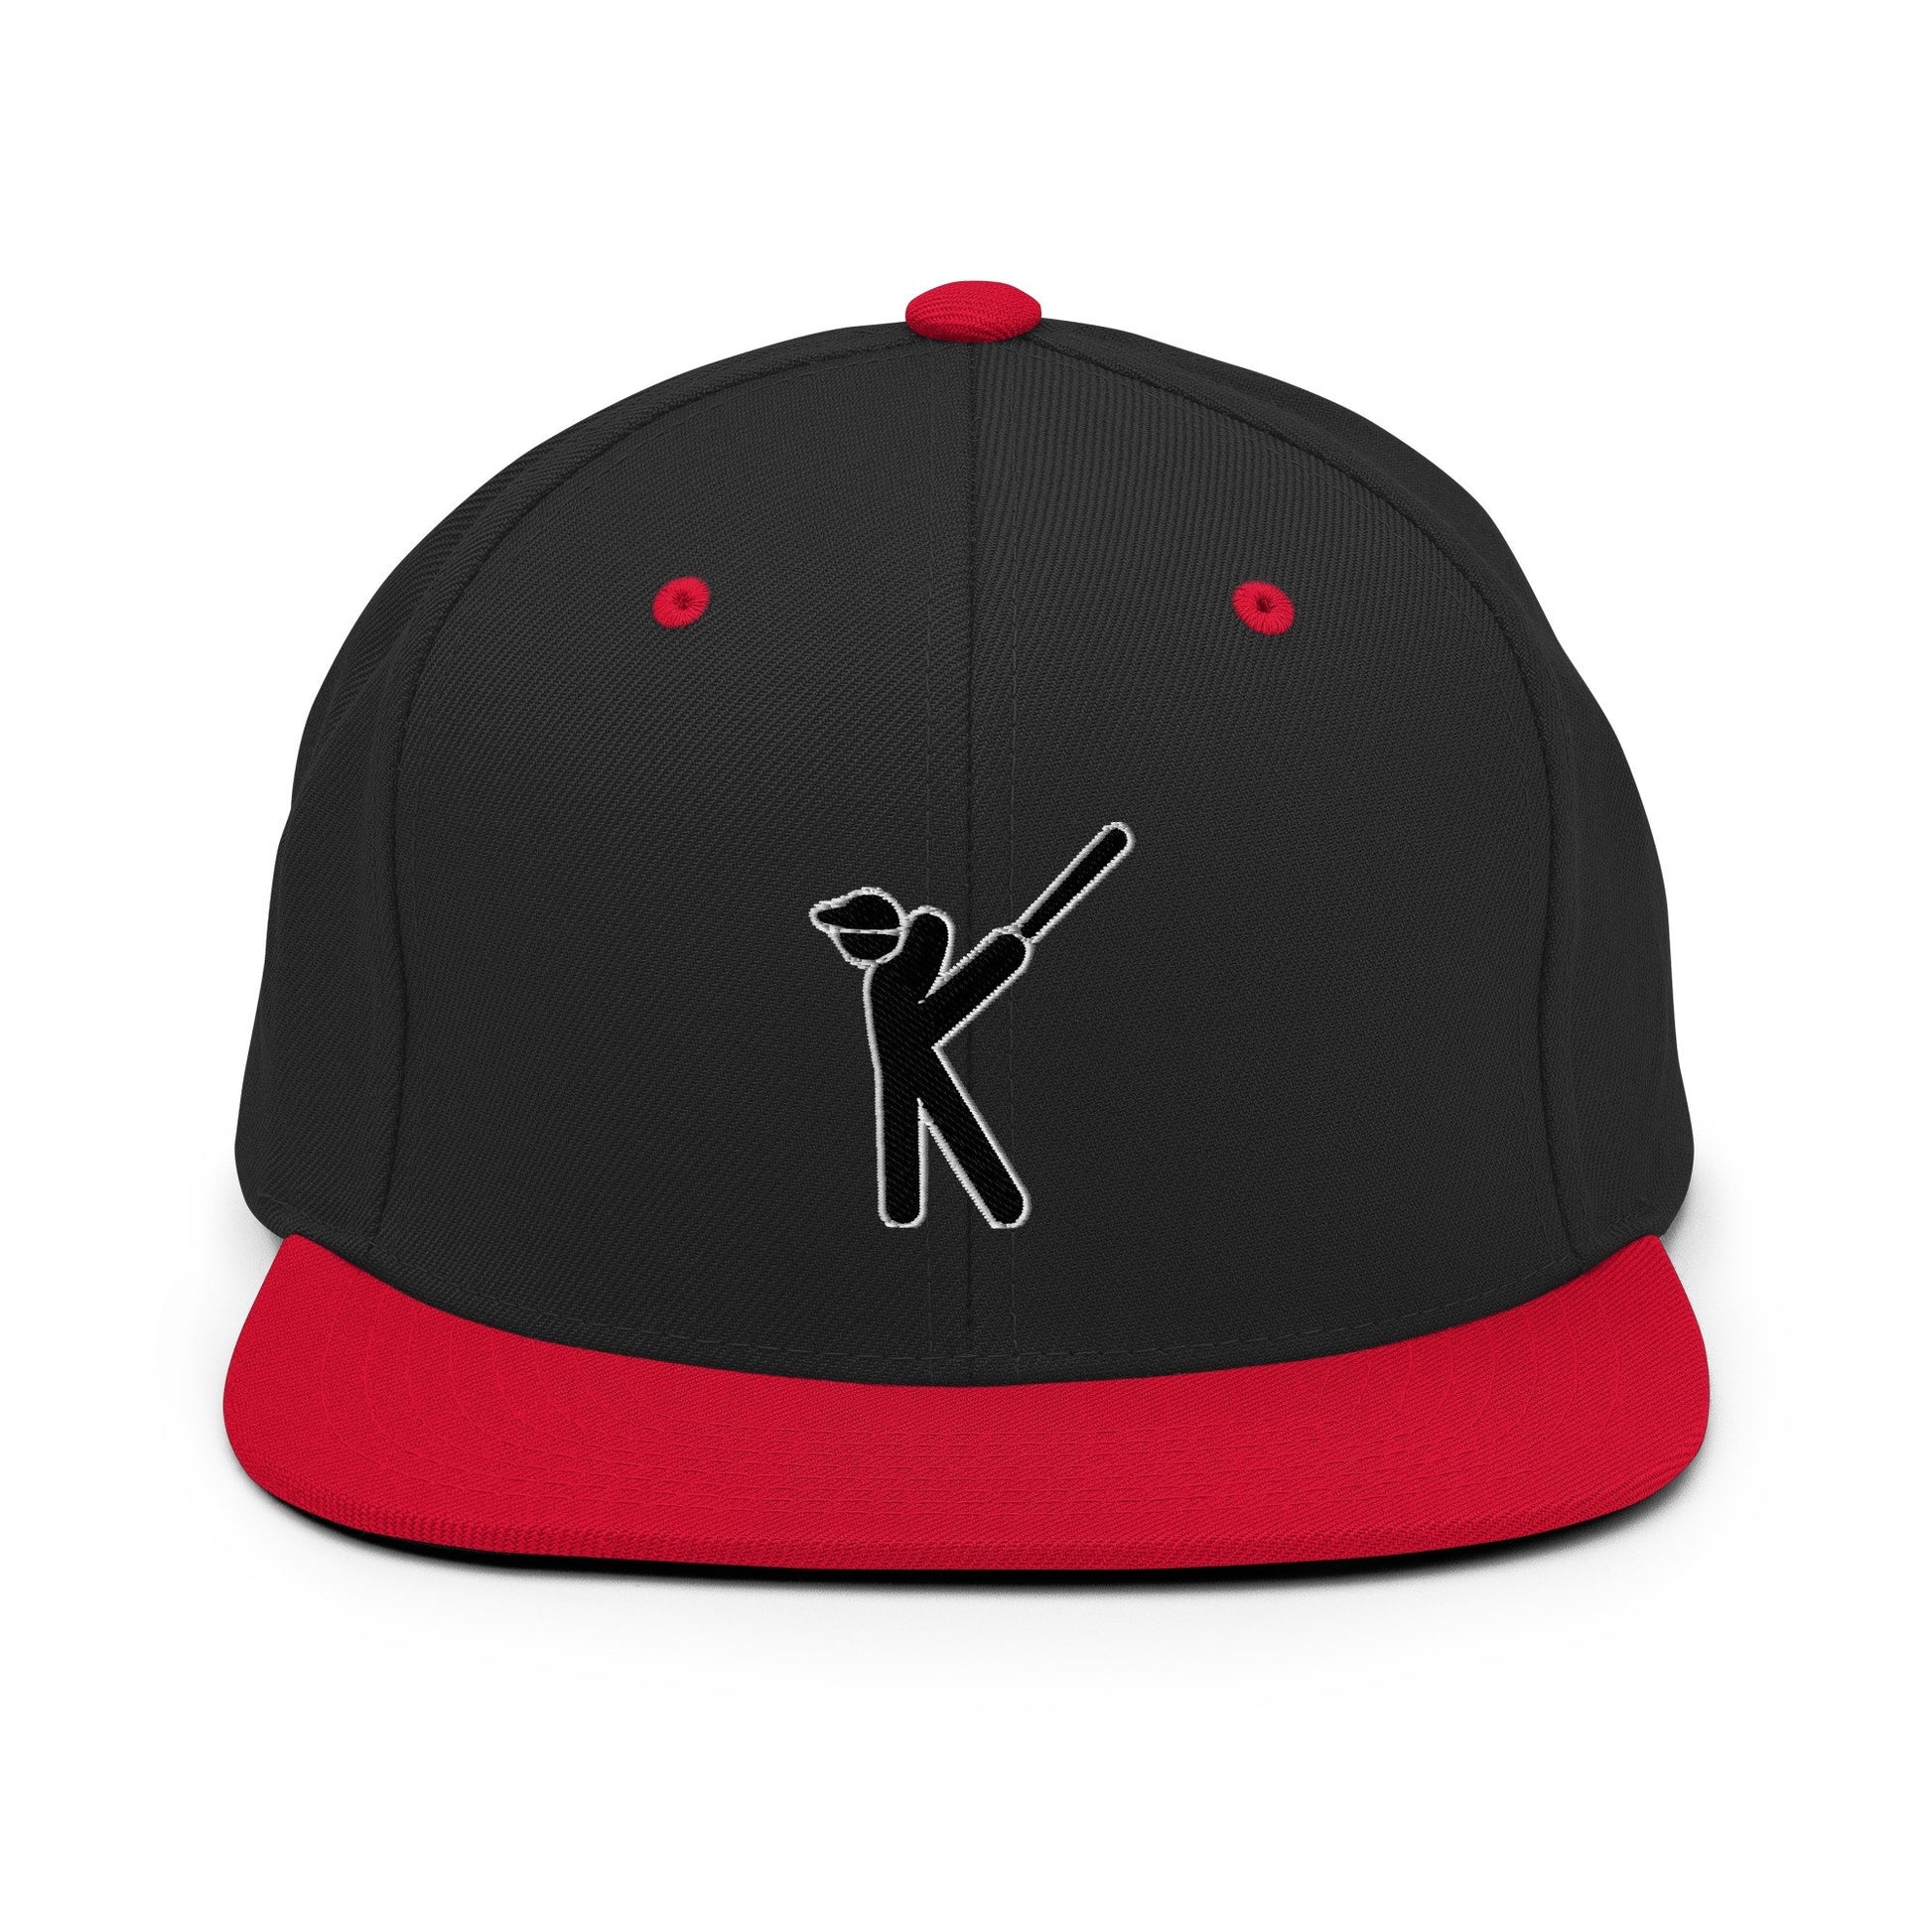 Kasabe ShowZone snapback hat in black with red brim and accents